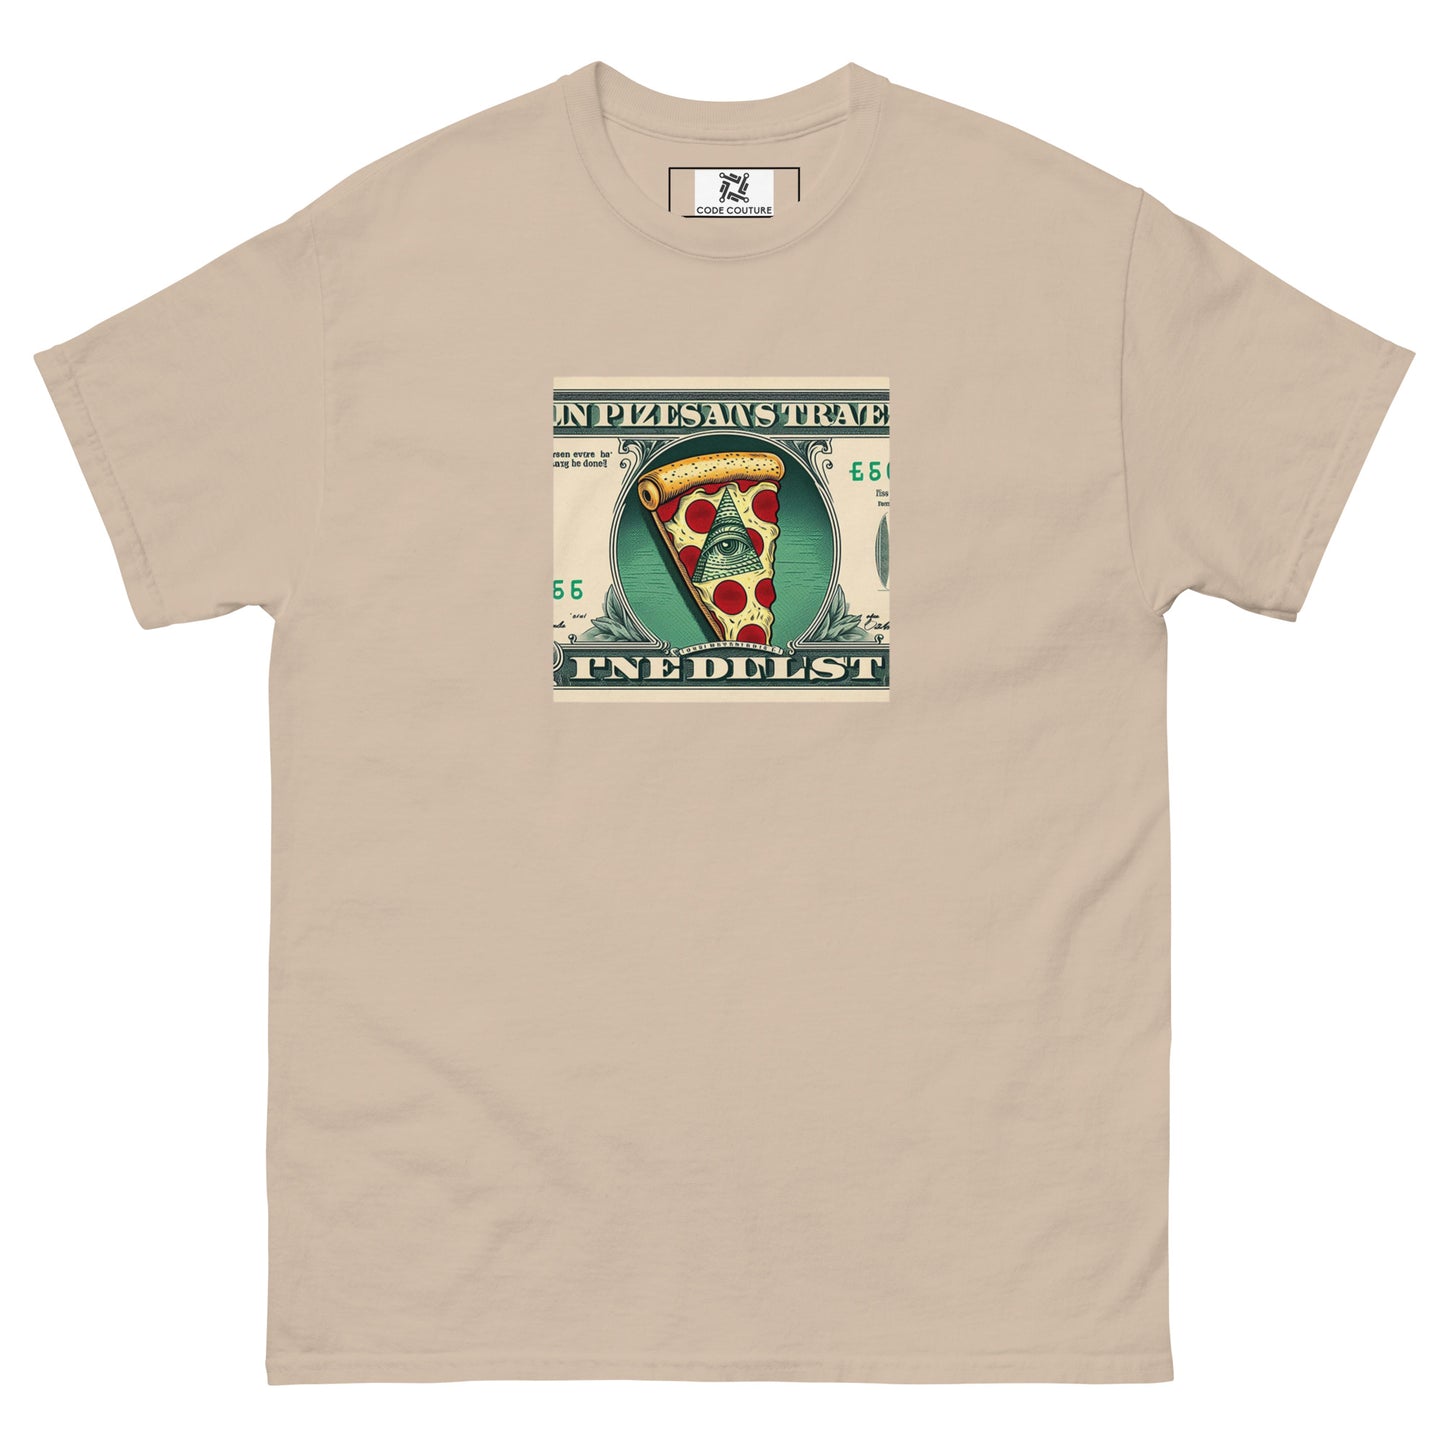 All Seeing Pizza tee